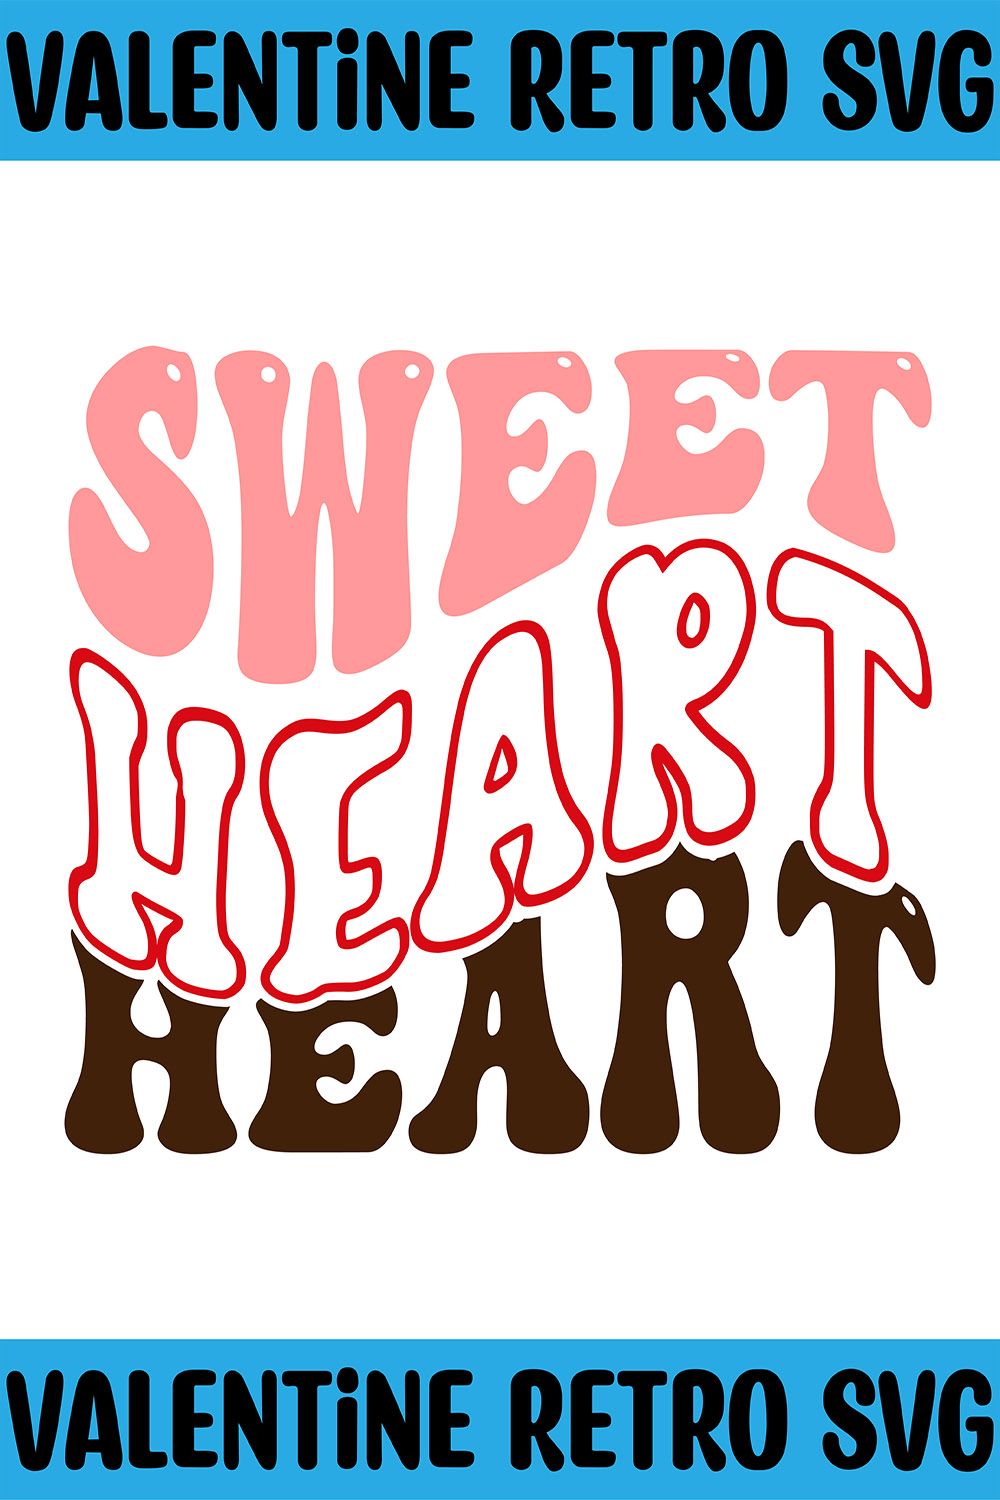 Sweet Heart Retro SVG pinterest preview image.